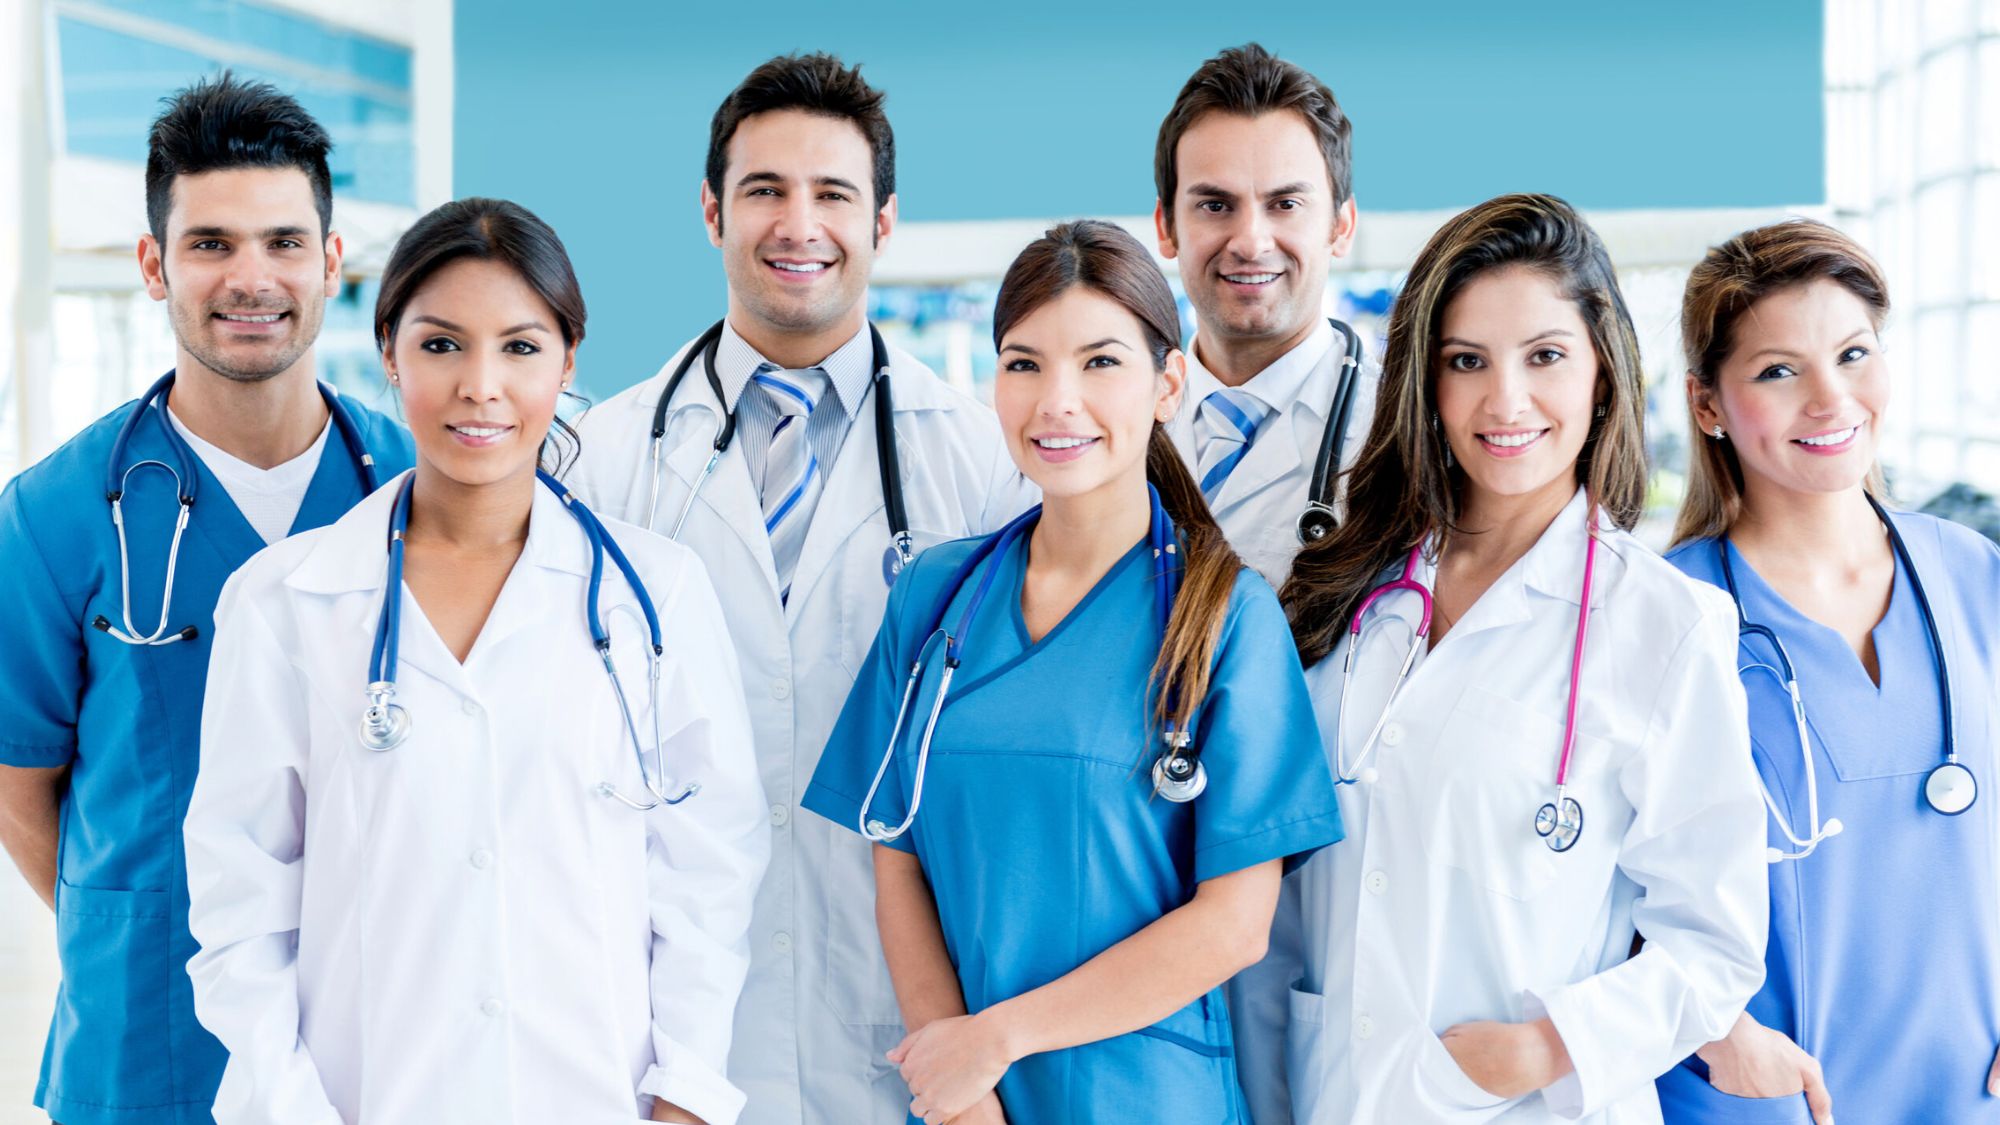 A group of doctors wearing medical apparel (scrubs) smiling